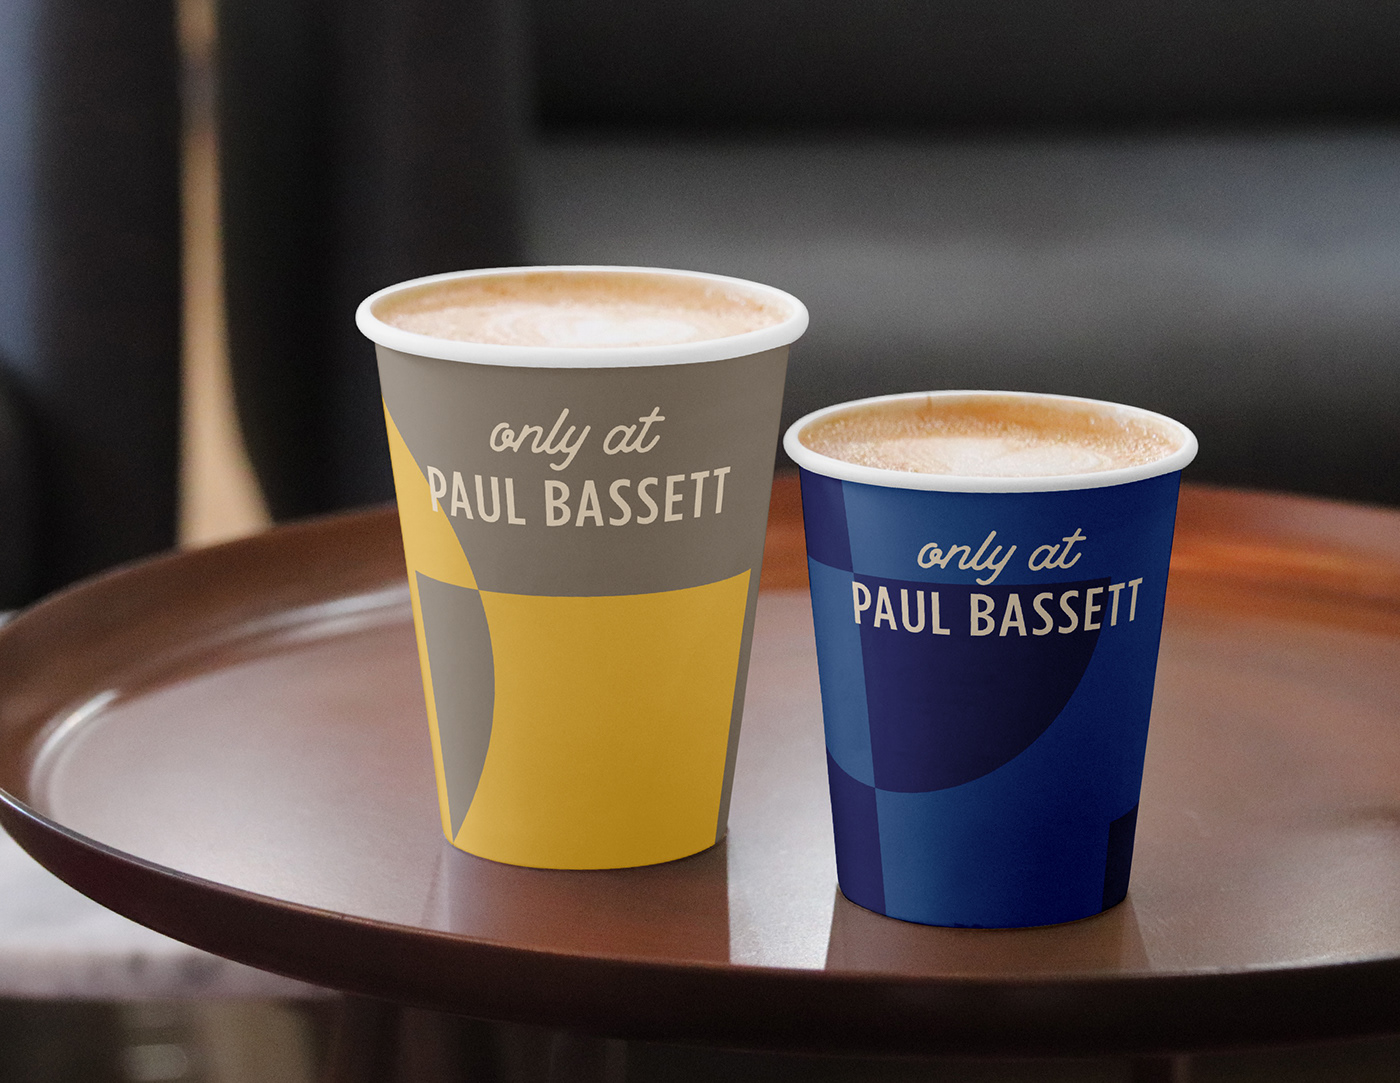 cafe Coffee coffeebrand franchise graphicdesign graphicmotif paulbasset posterdesign visual identity ynldesign